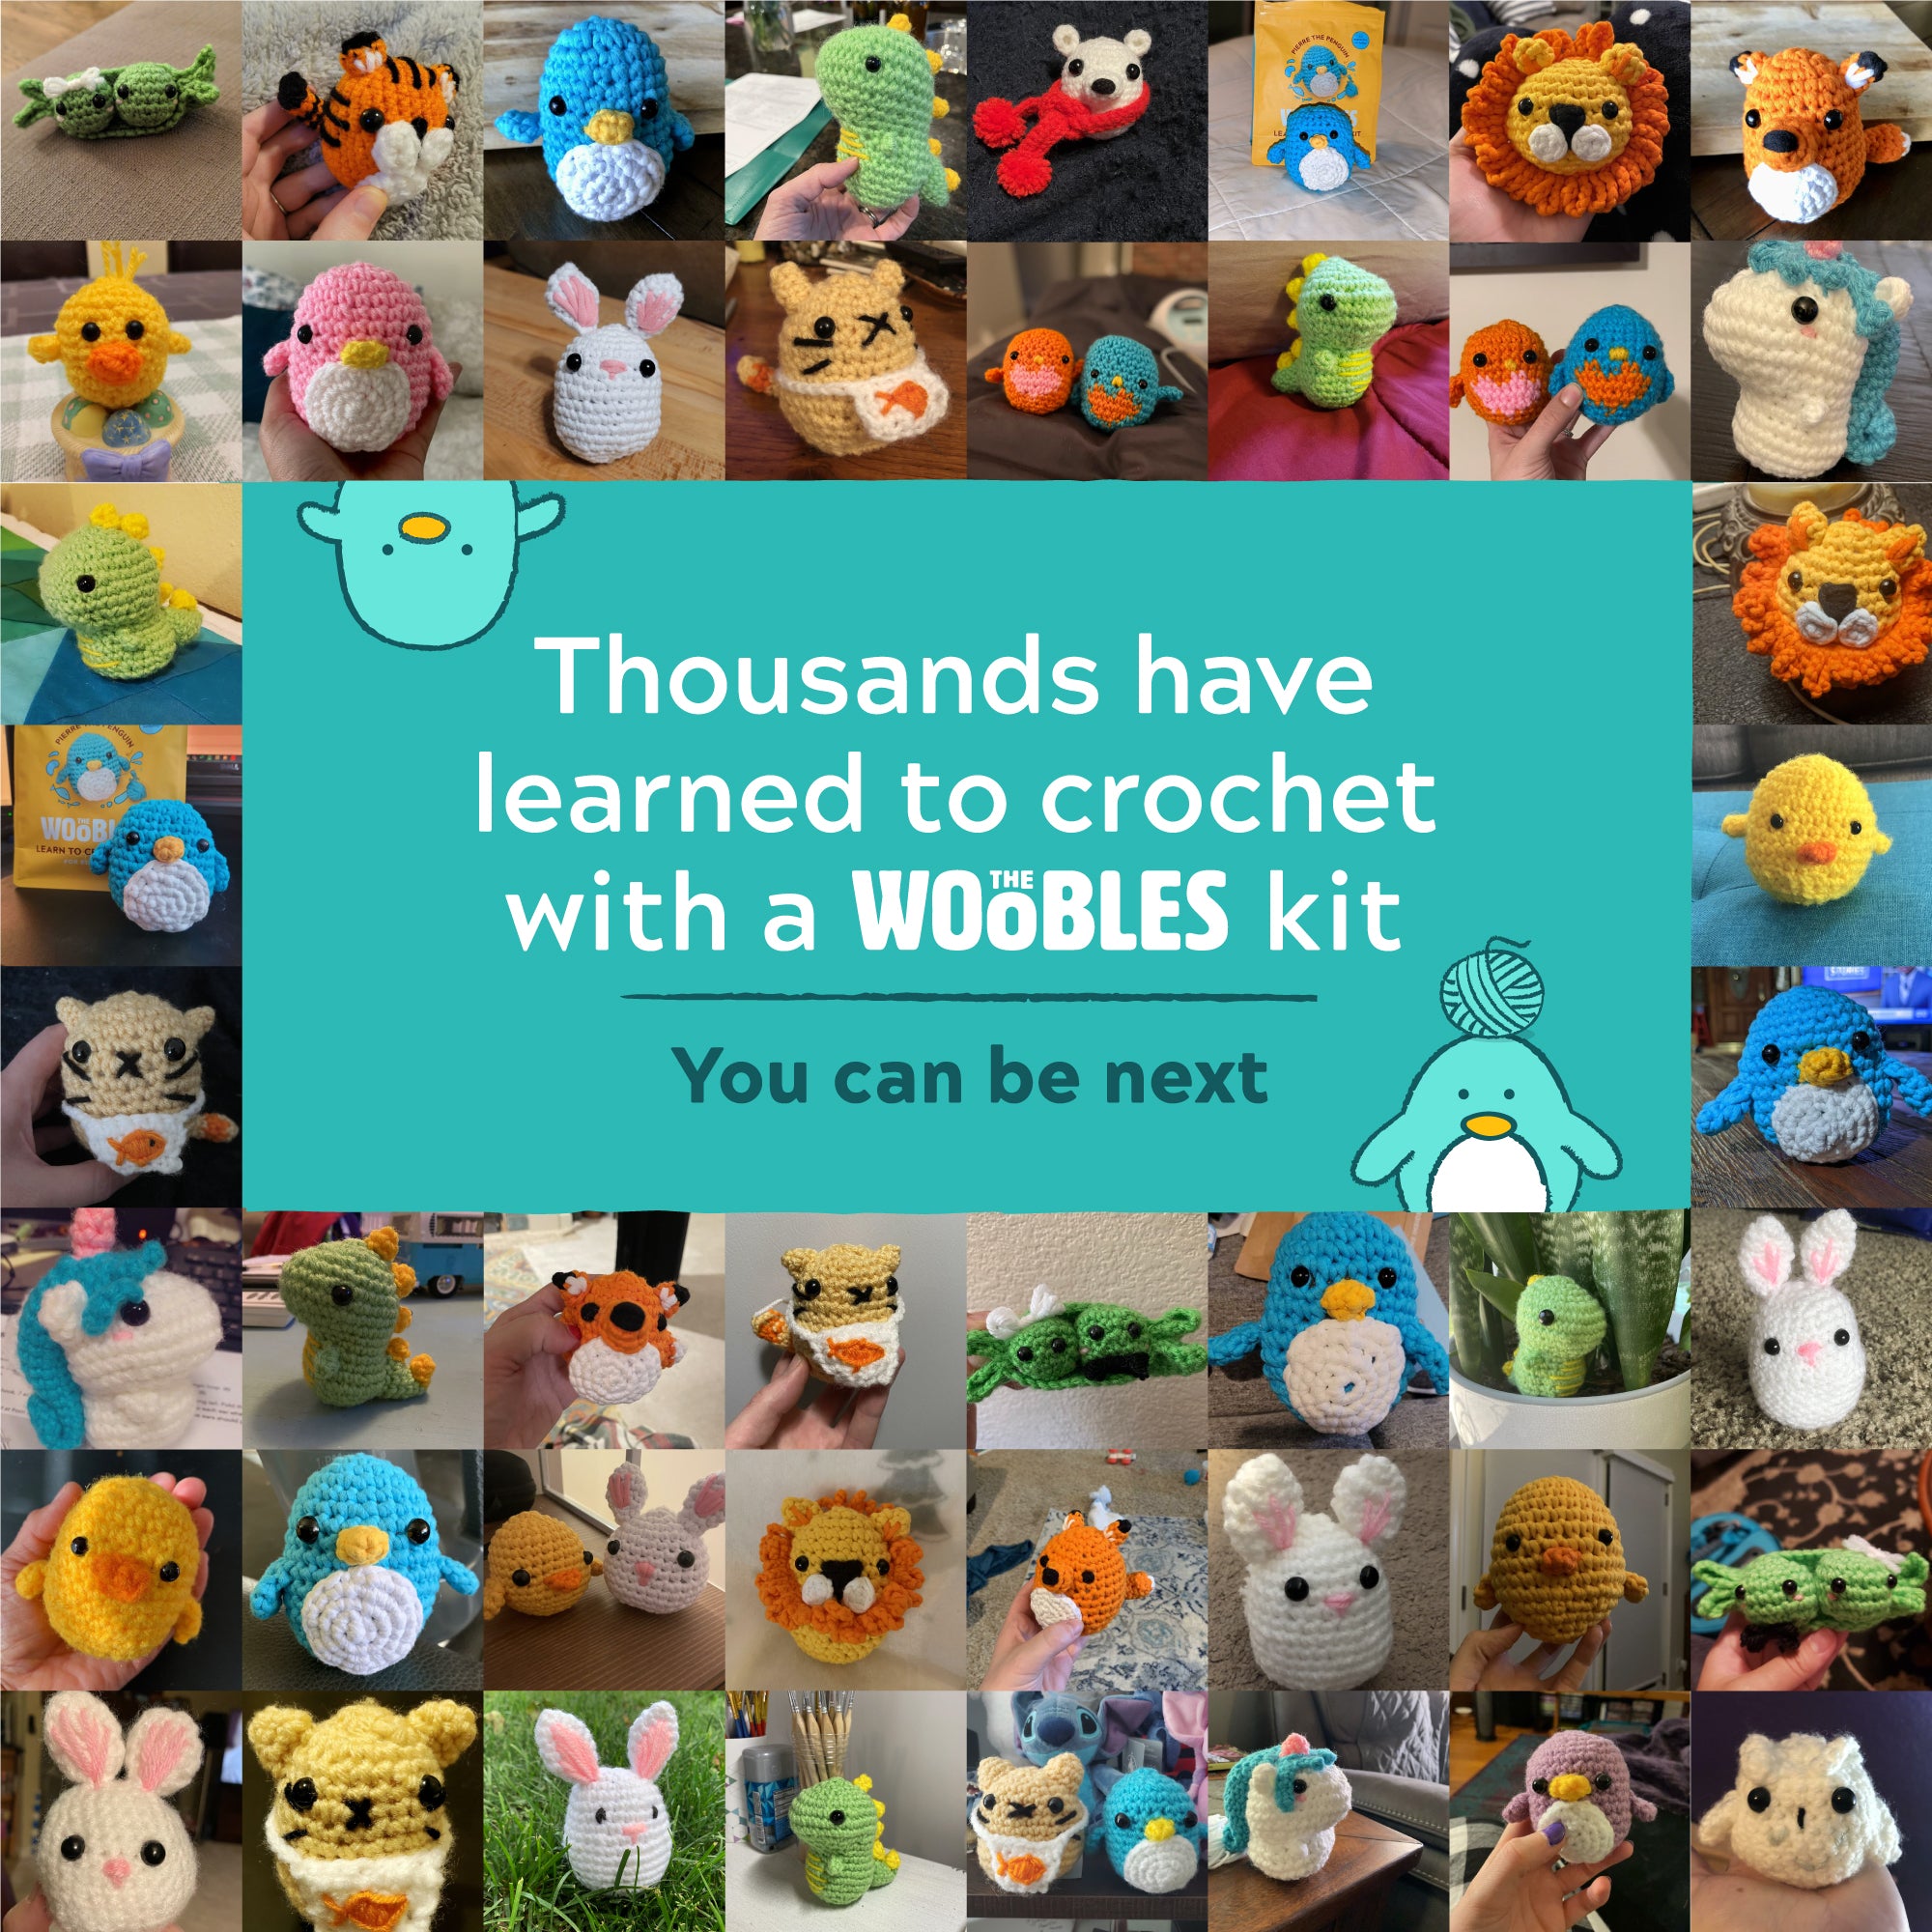 The Woobles!